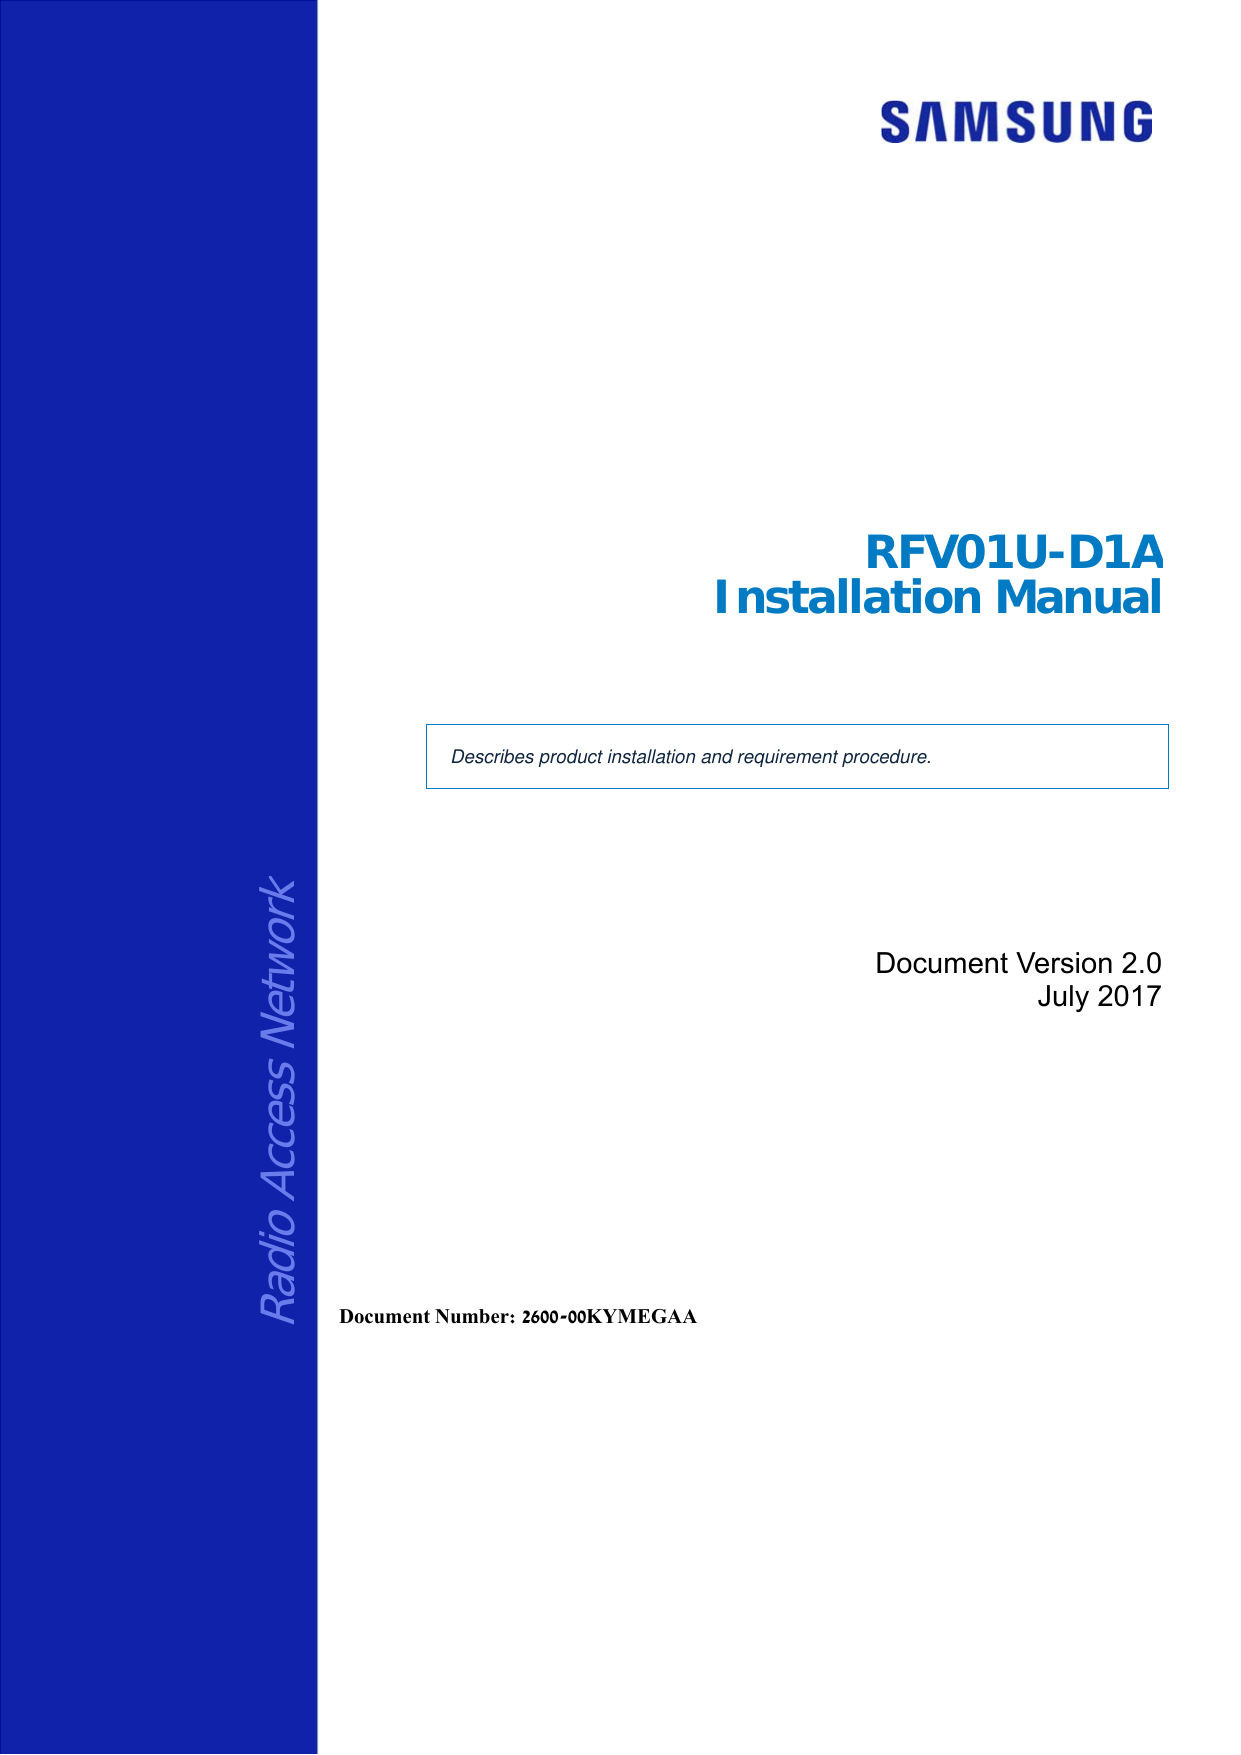      Radio Access Network RFV01U-D1AInstallation Manual  Describes product installation and requirement procedure. Document Version 2.0 July 2017      Document Number: 2600-00KYMEGAA 